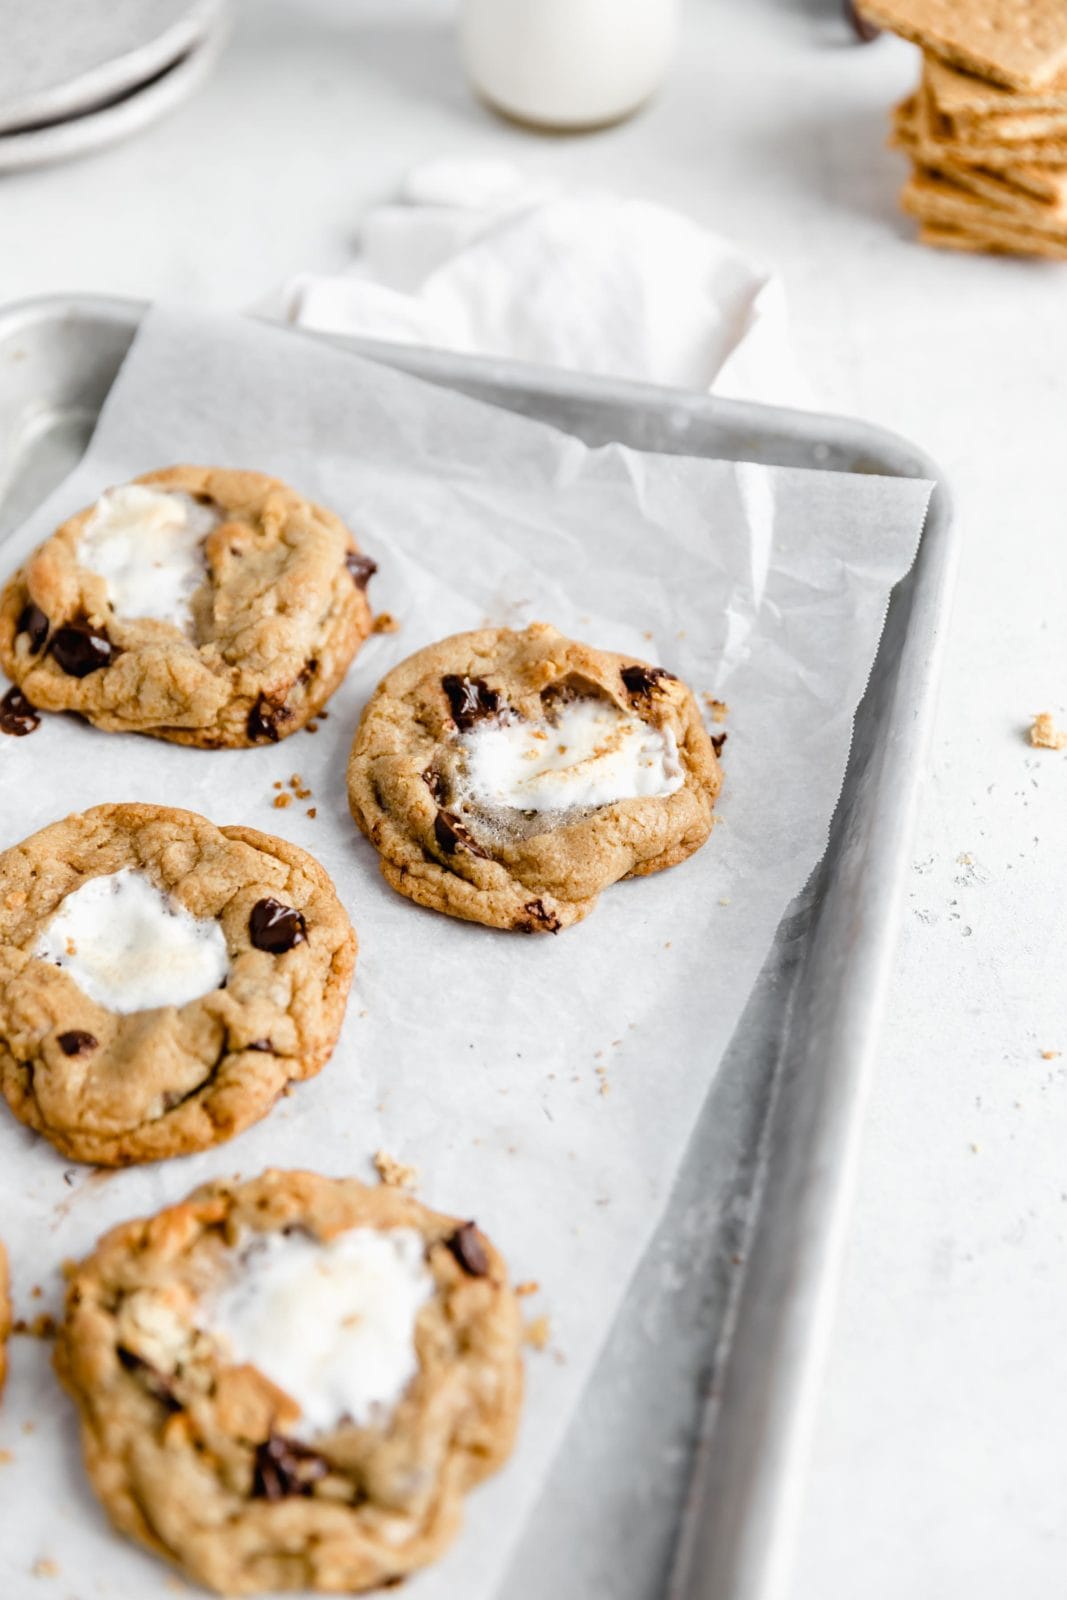 s'mores cookies with a gooey marshmallow center and chocolate chips